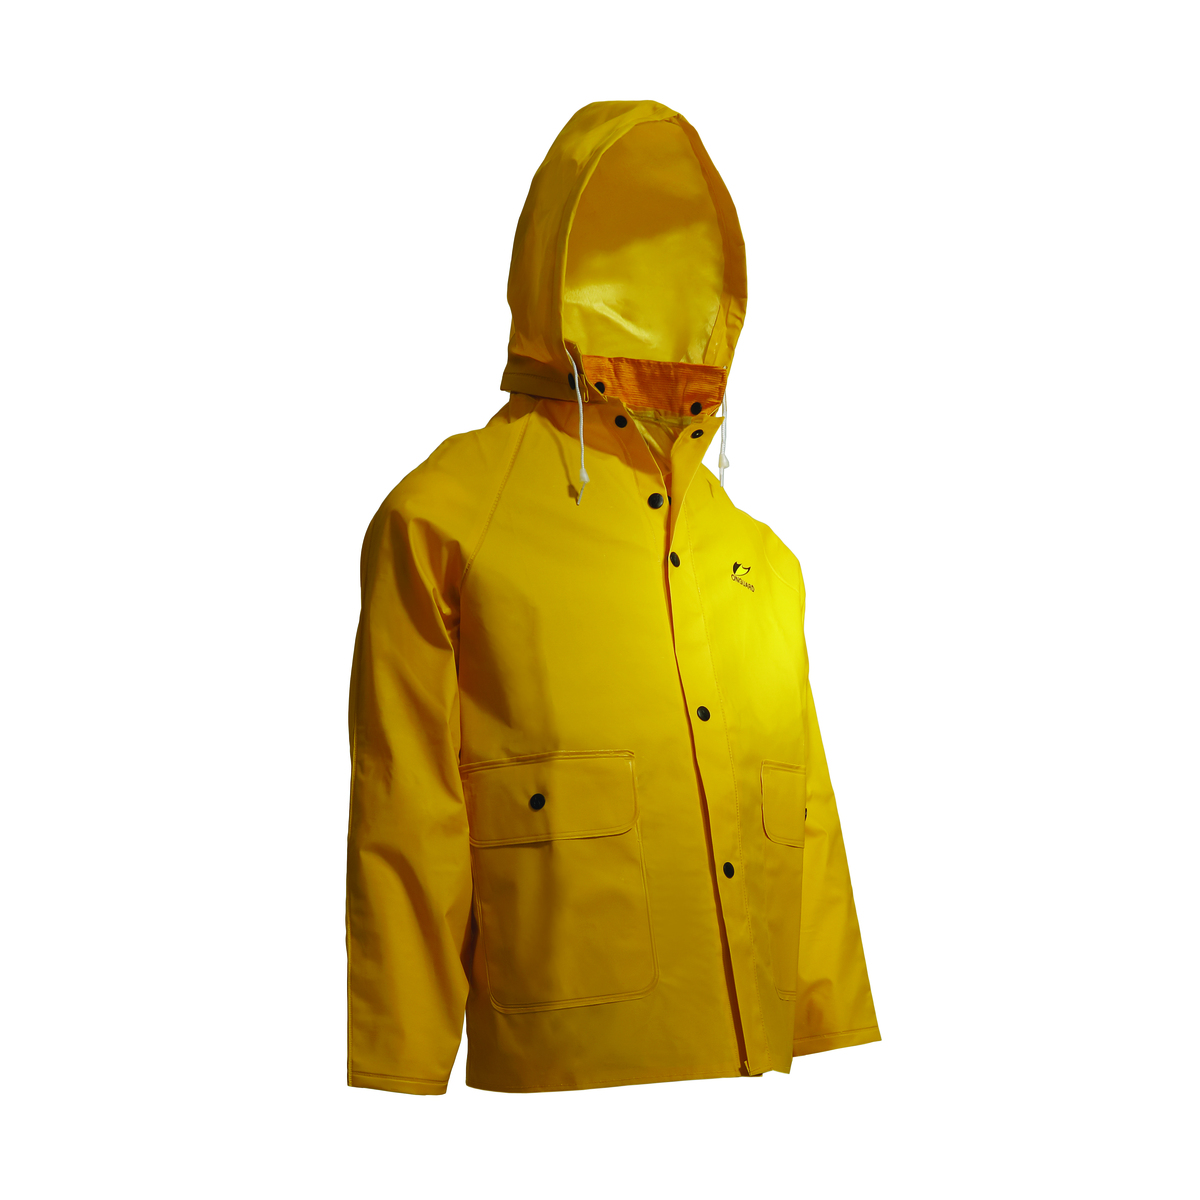 Dunlop® Protective Footwear 2X Yellow Sitex .35 mm Polyester/PVC Rain Jacket With Detachable Hood